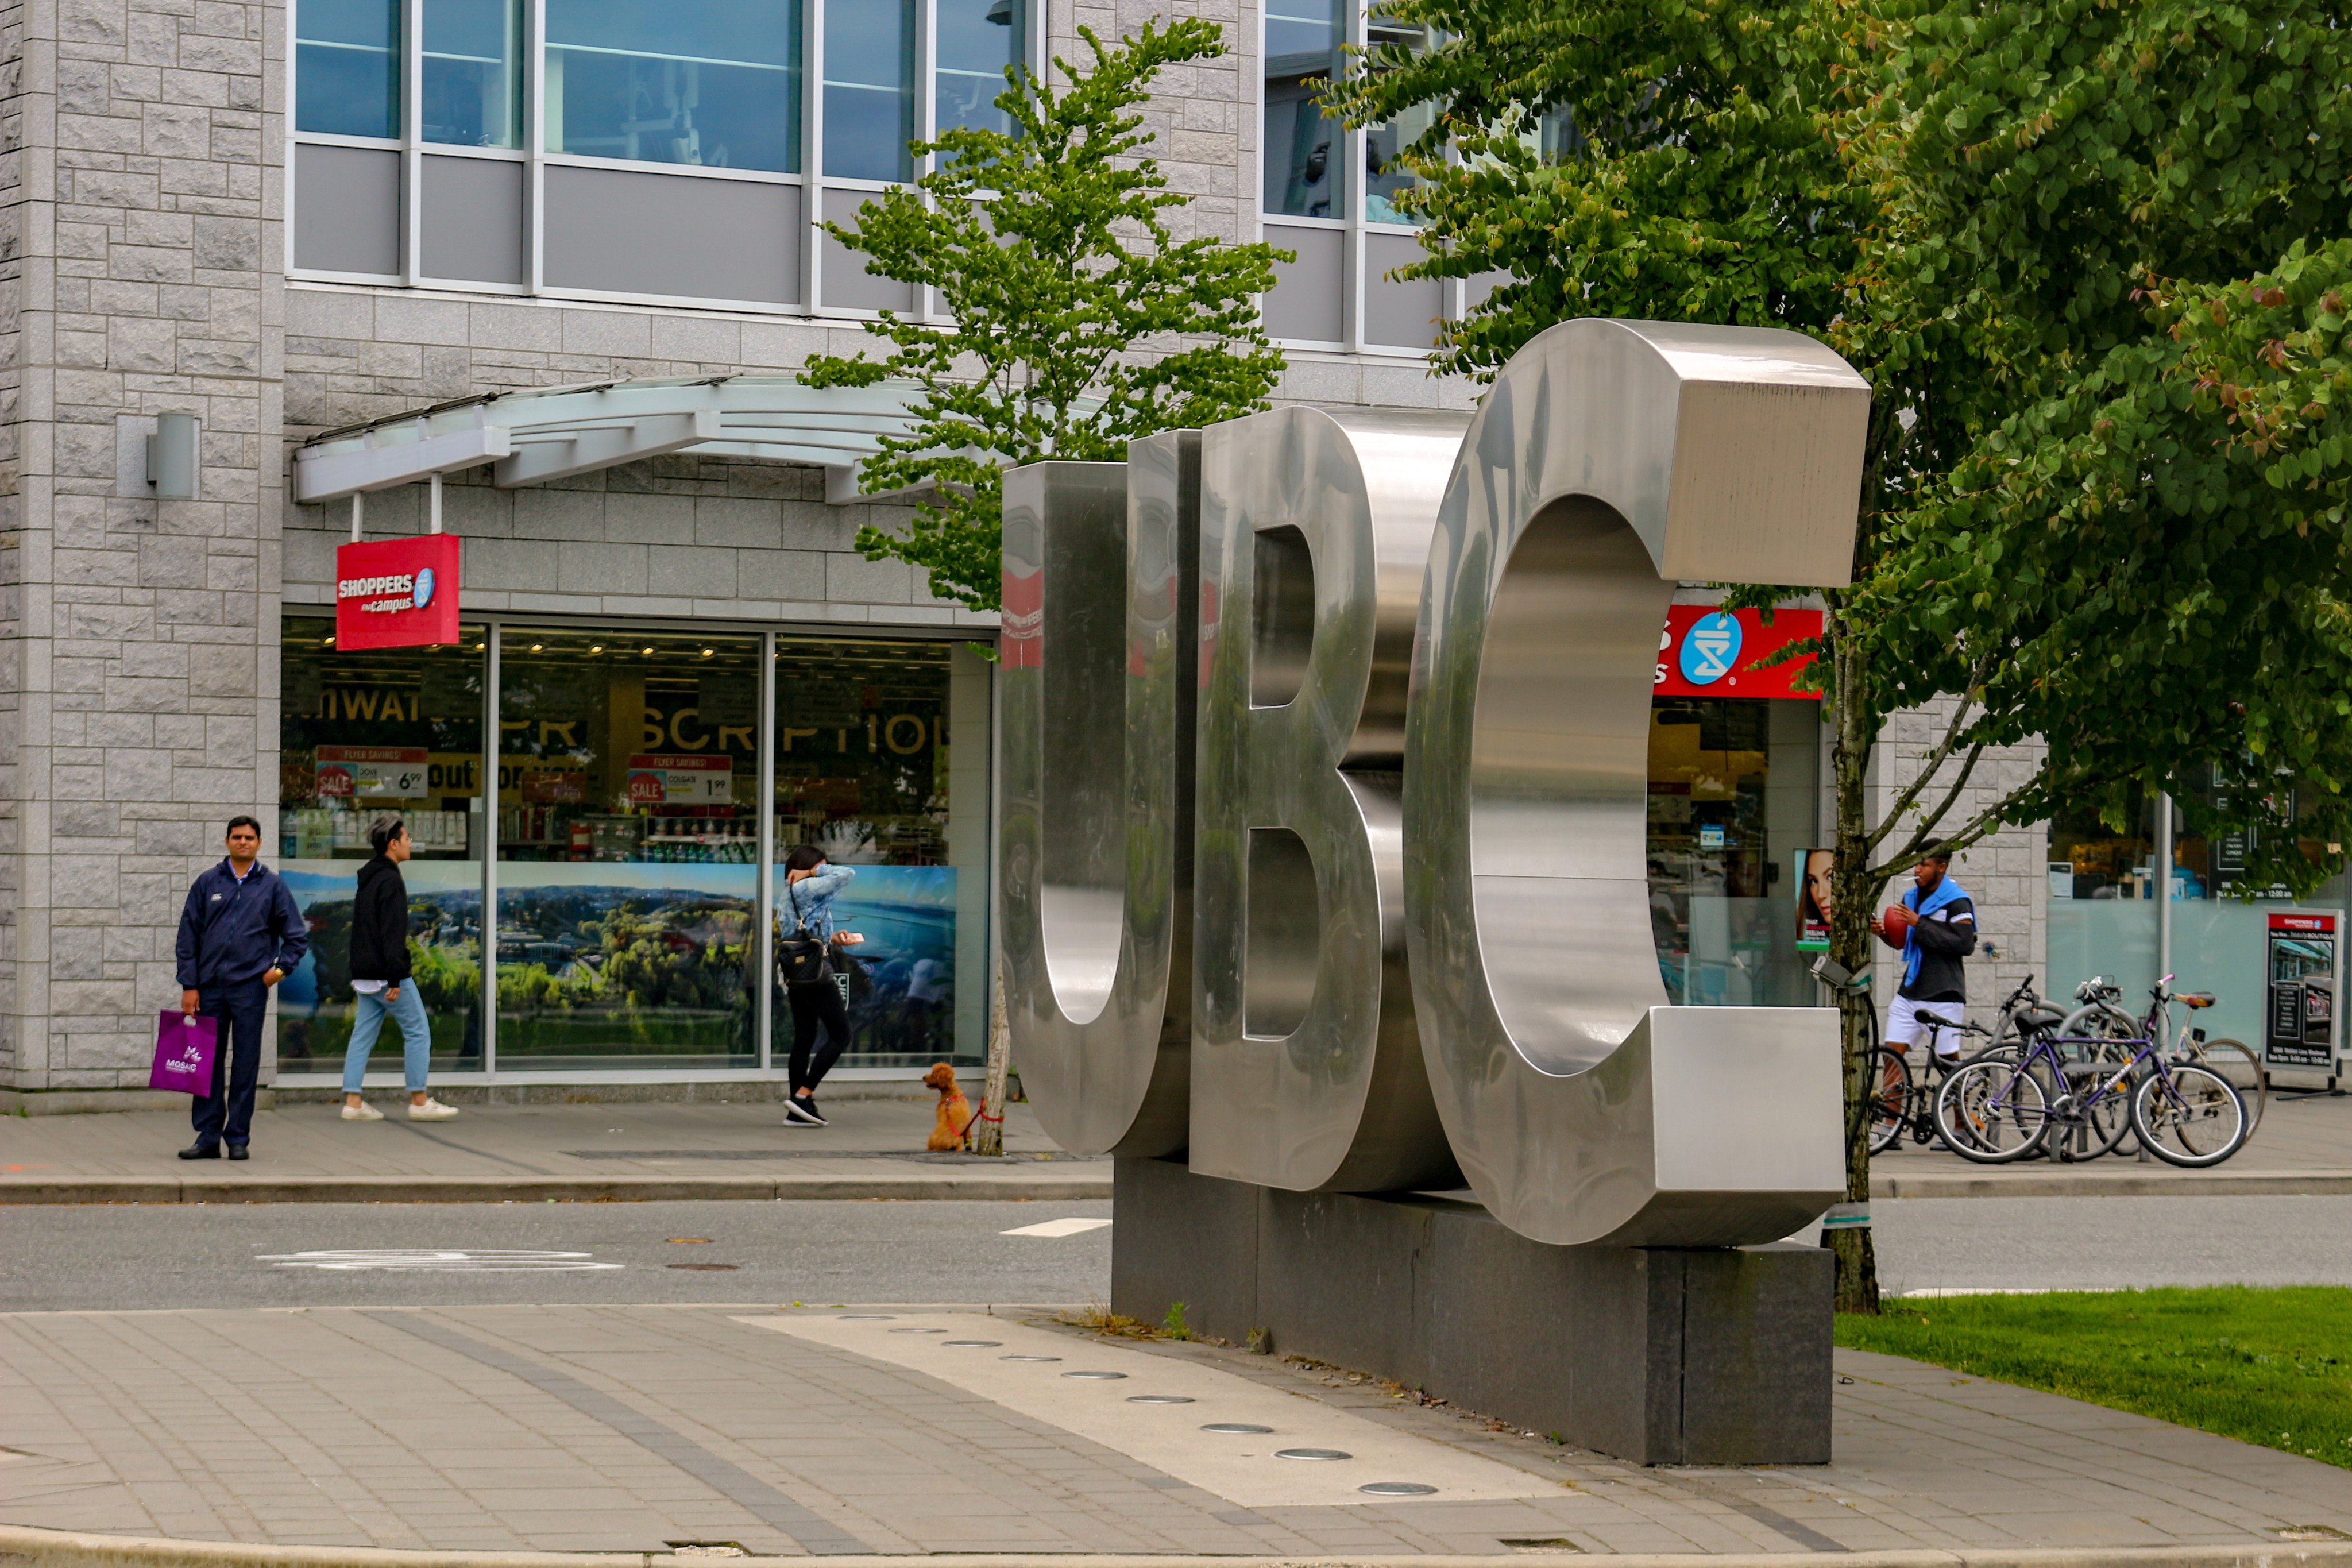 The University of British Columbia in Vancouver, Canada, is among overseas institutions that have recently opened centres devoted to the study of Hong Kong affairs, as such studies in Hong Kong become constricted by politics. Photo: Shutterstock